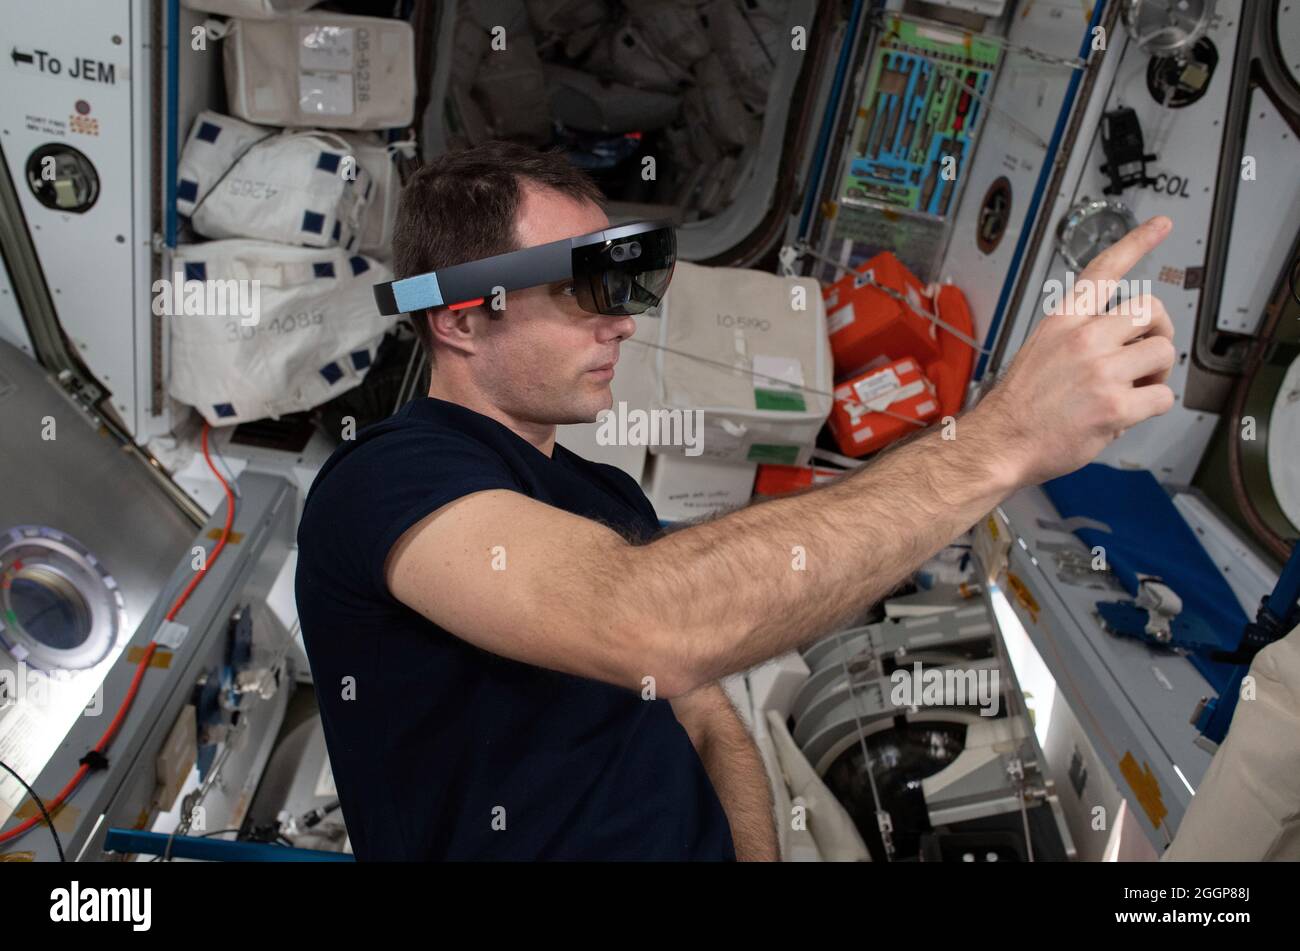 Expedition 65 Flight Engineer Thomas Pesquet of ESA (European Space Agency) wears Sidekick goggles to demonstrate using augmented reality while interacting with components aboard the International Space Station. Stock Photo